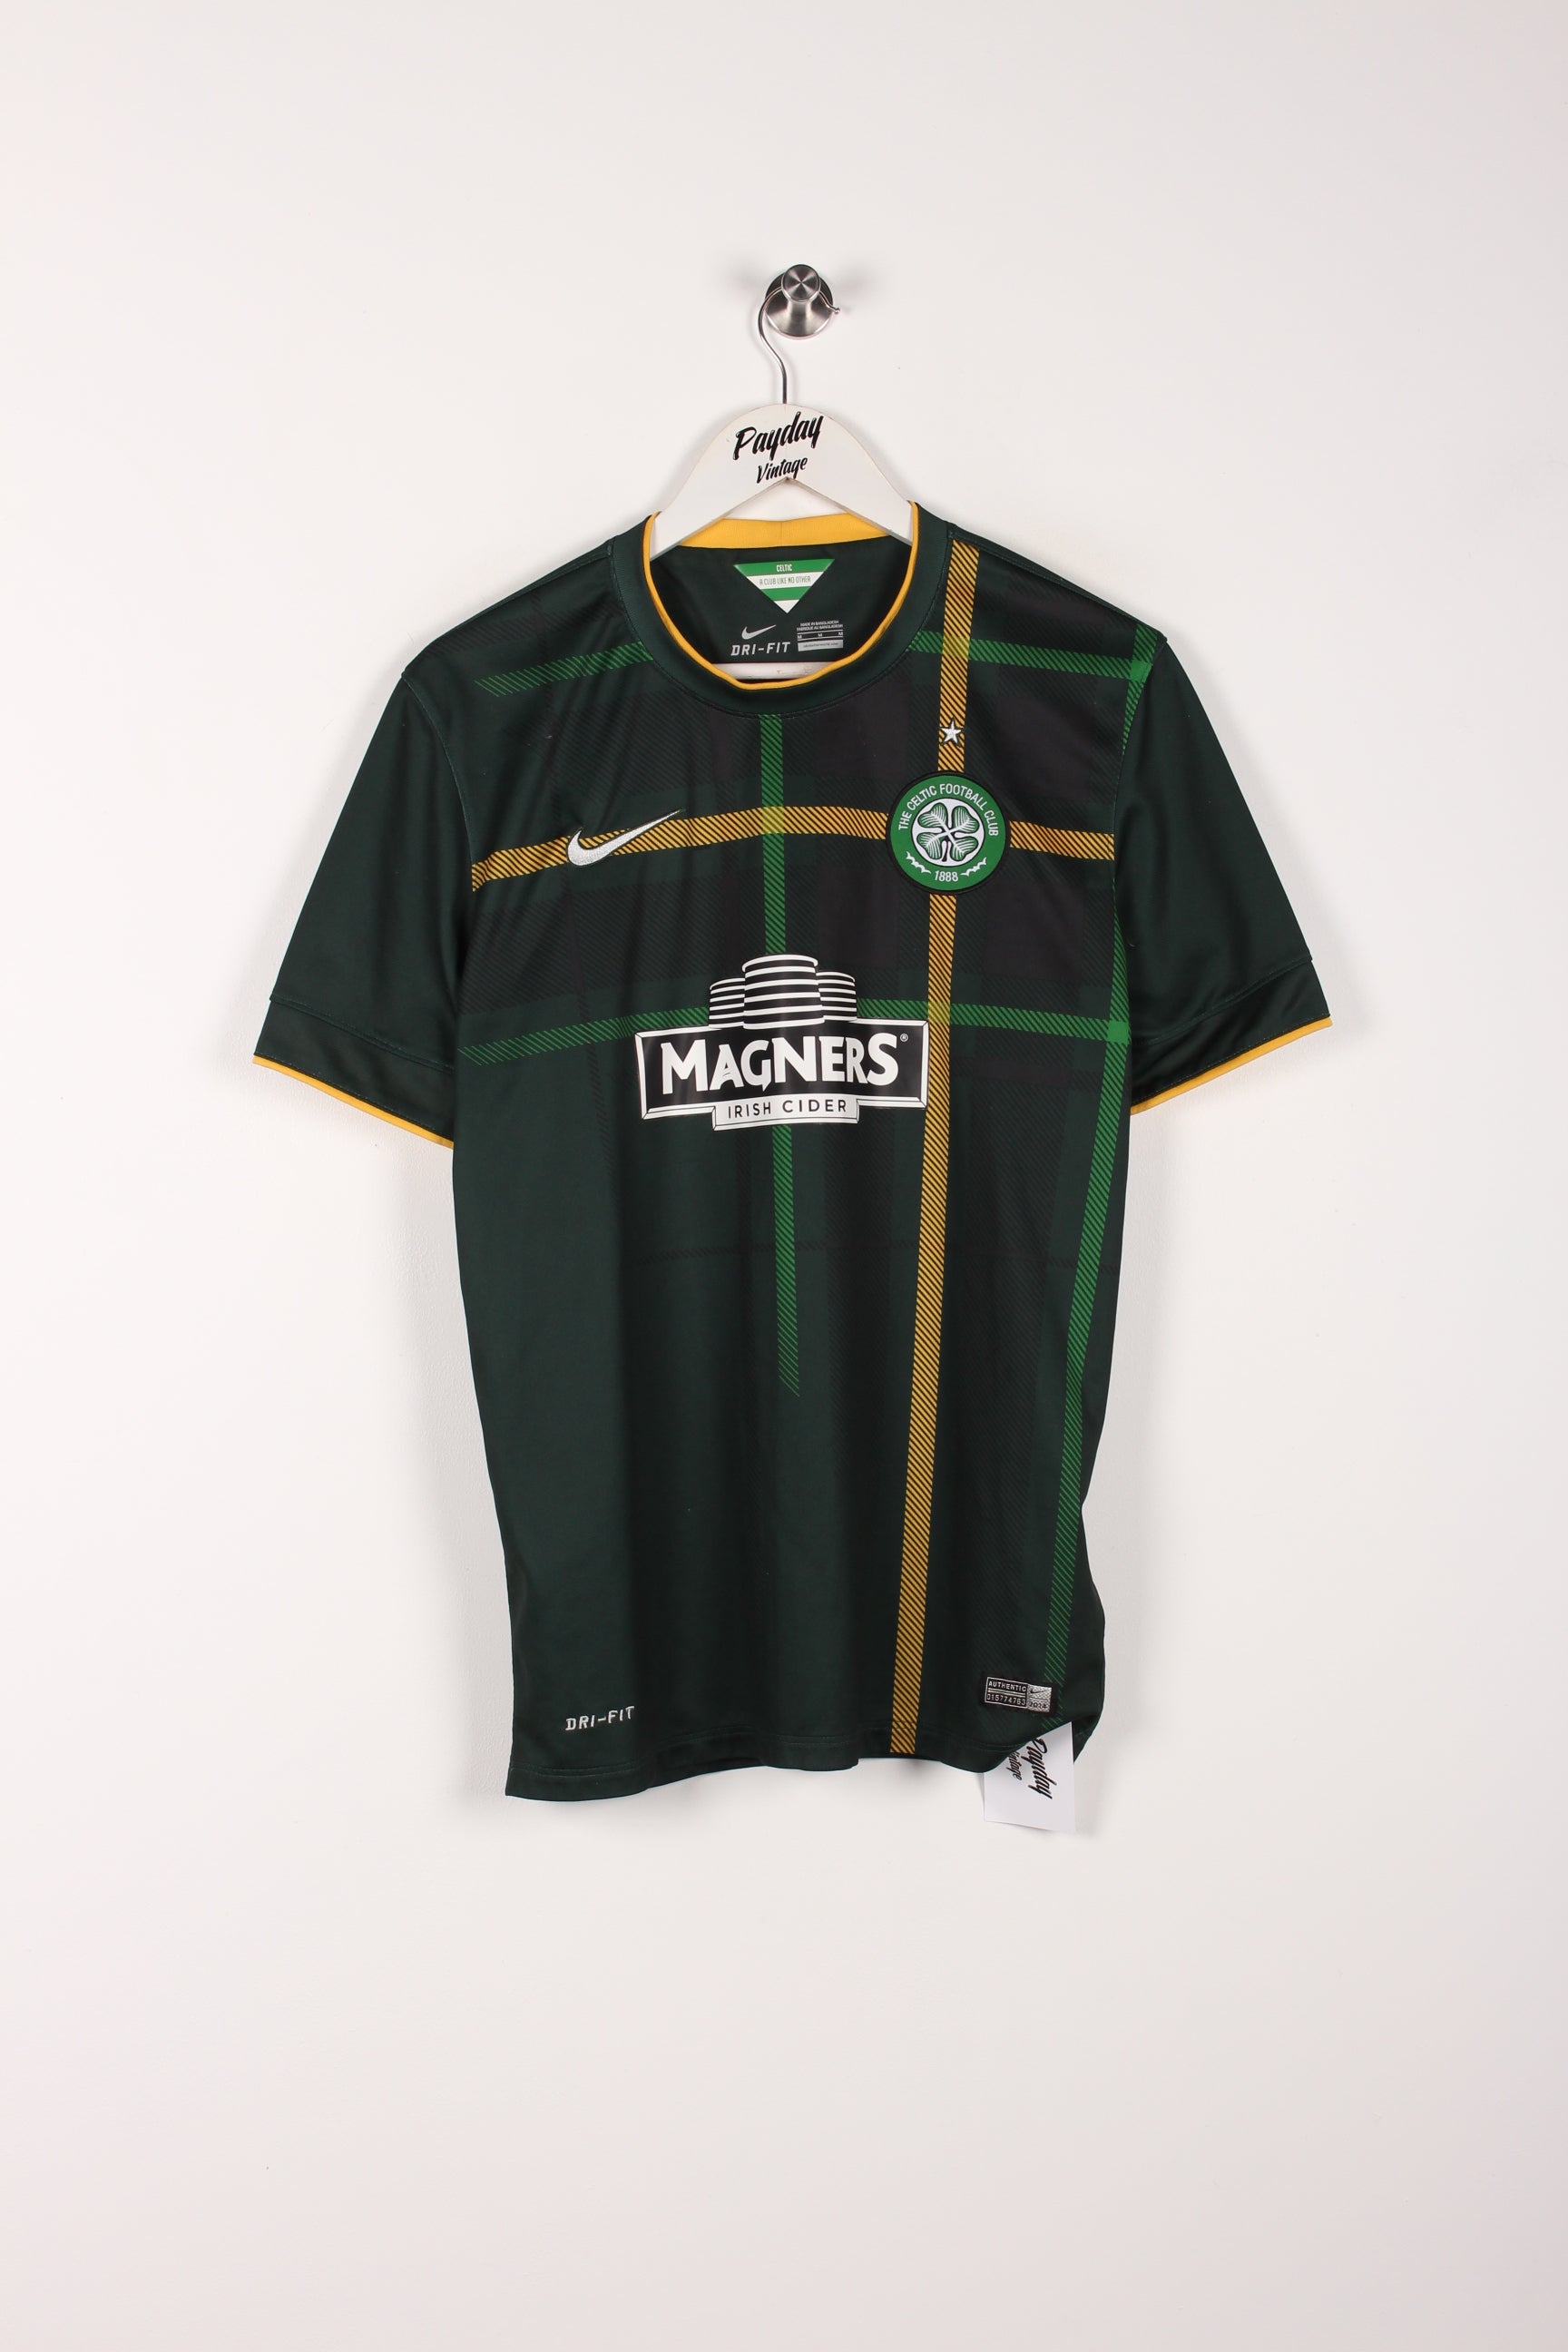 New Nike Celtic 14-15 Away and Third Kits